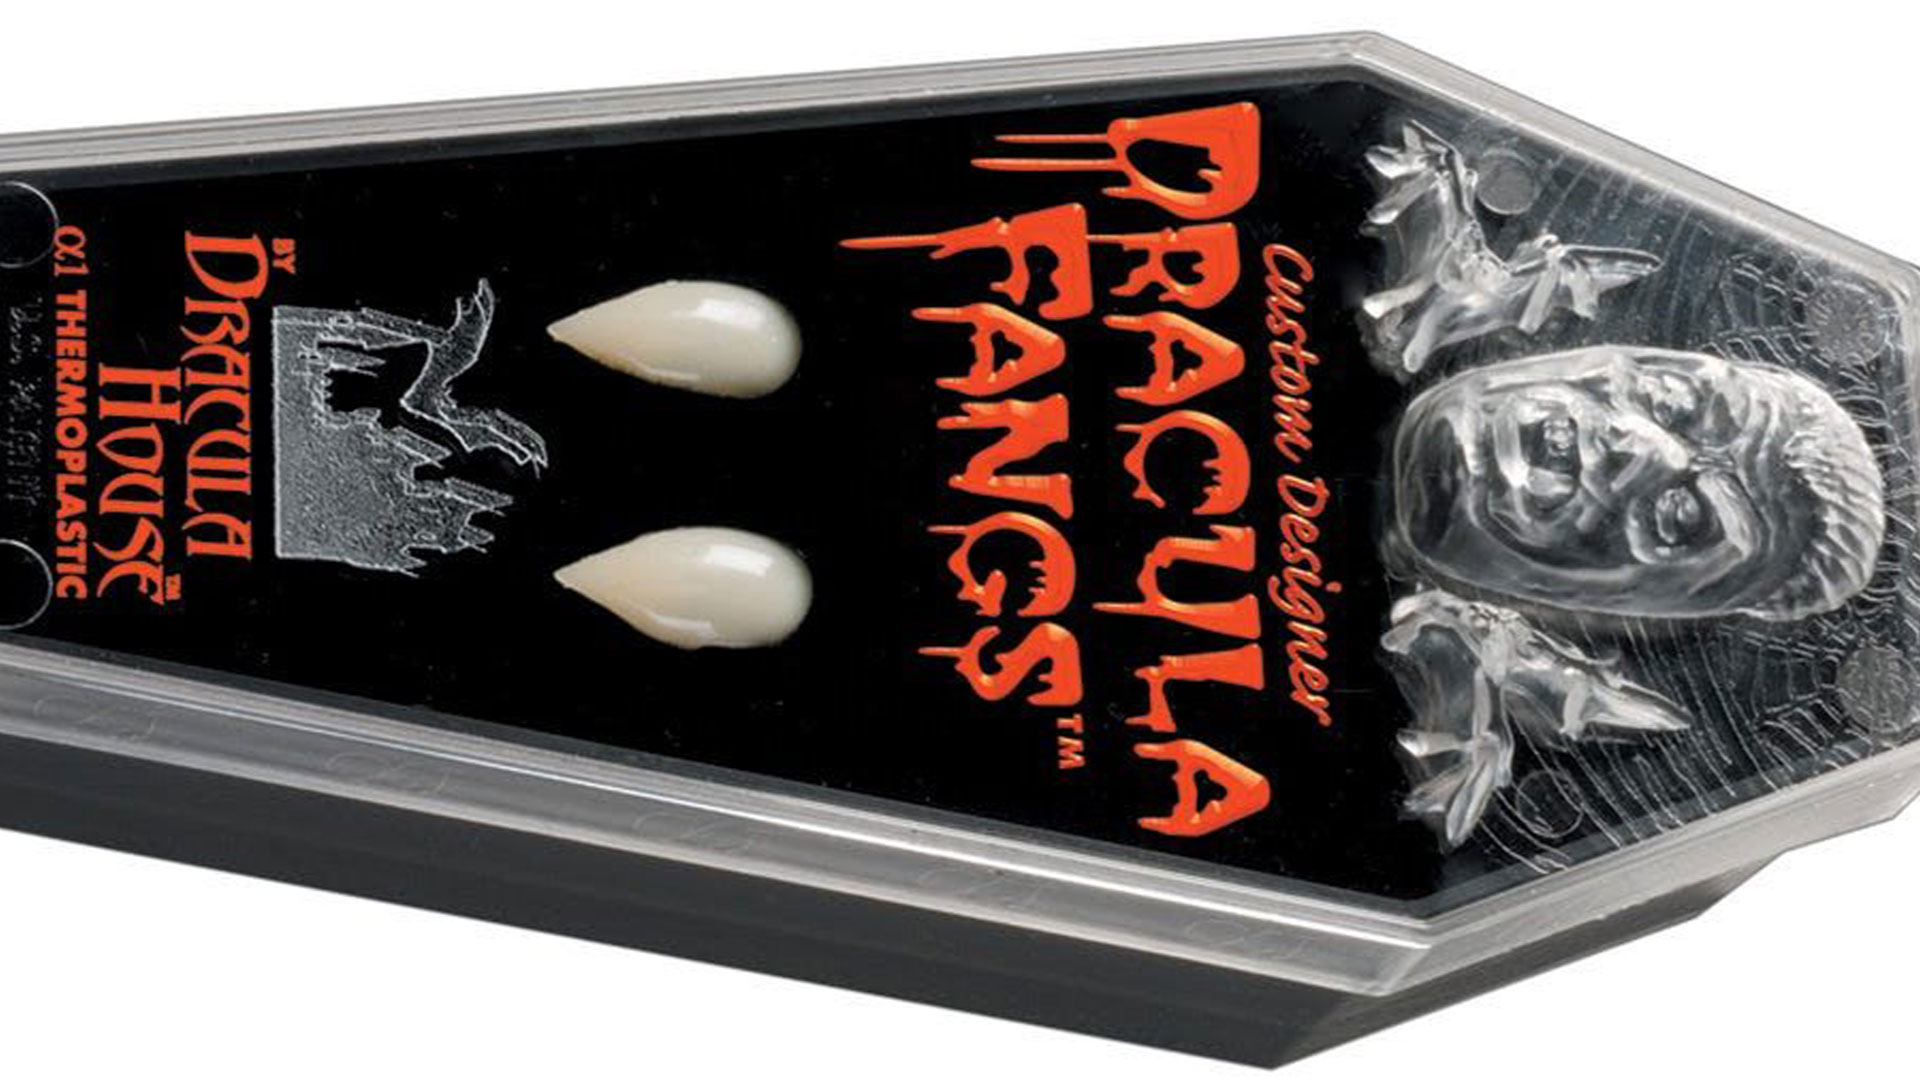 A box with dracula fangs for a Halloween costume.